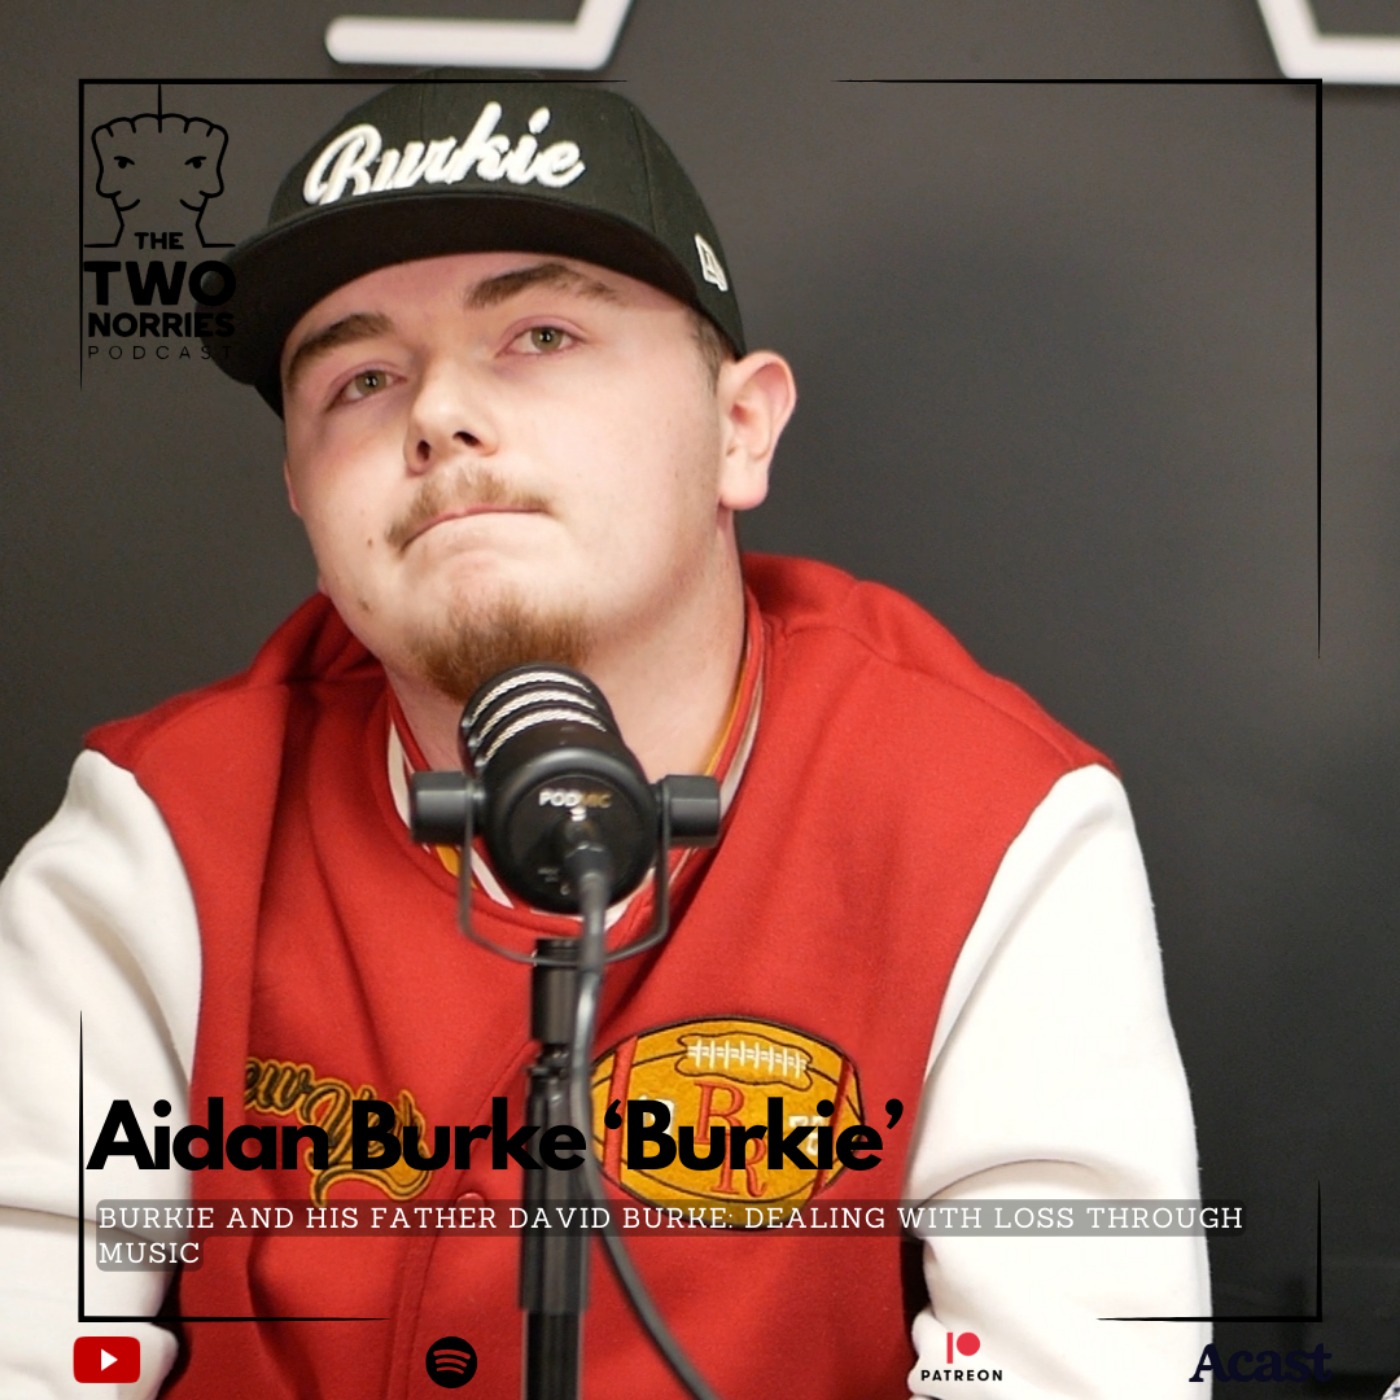 #178 Burkie and his father David burke: Dealing with loss through music